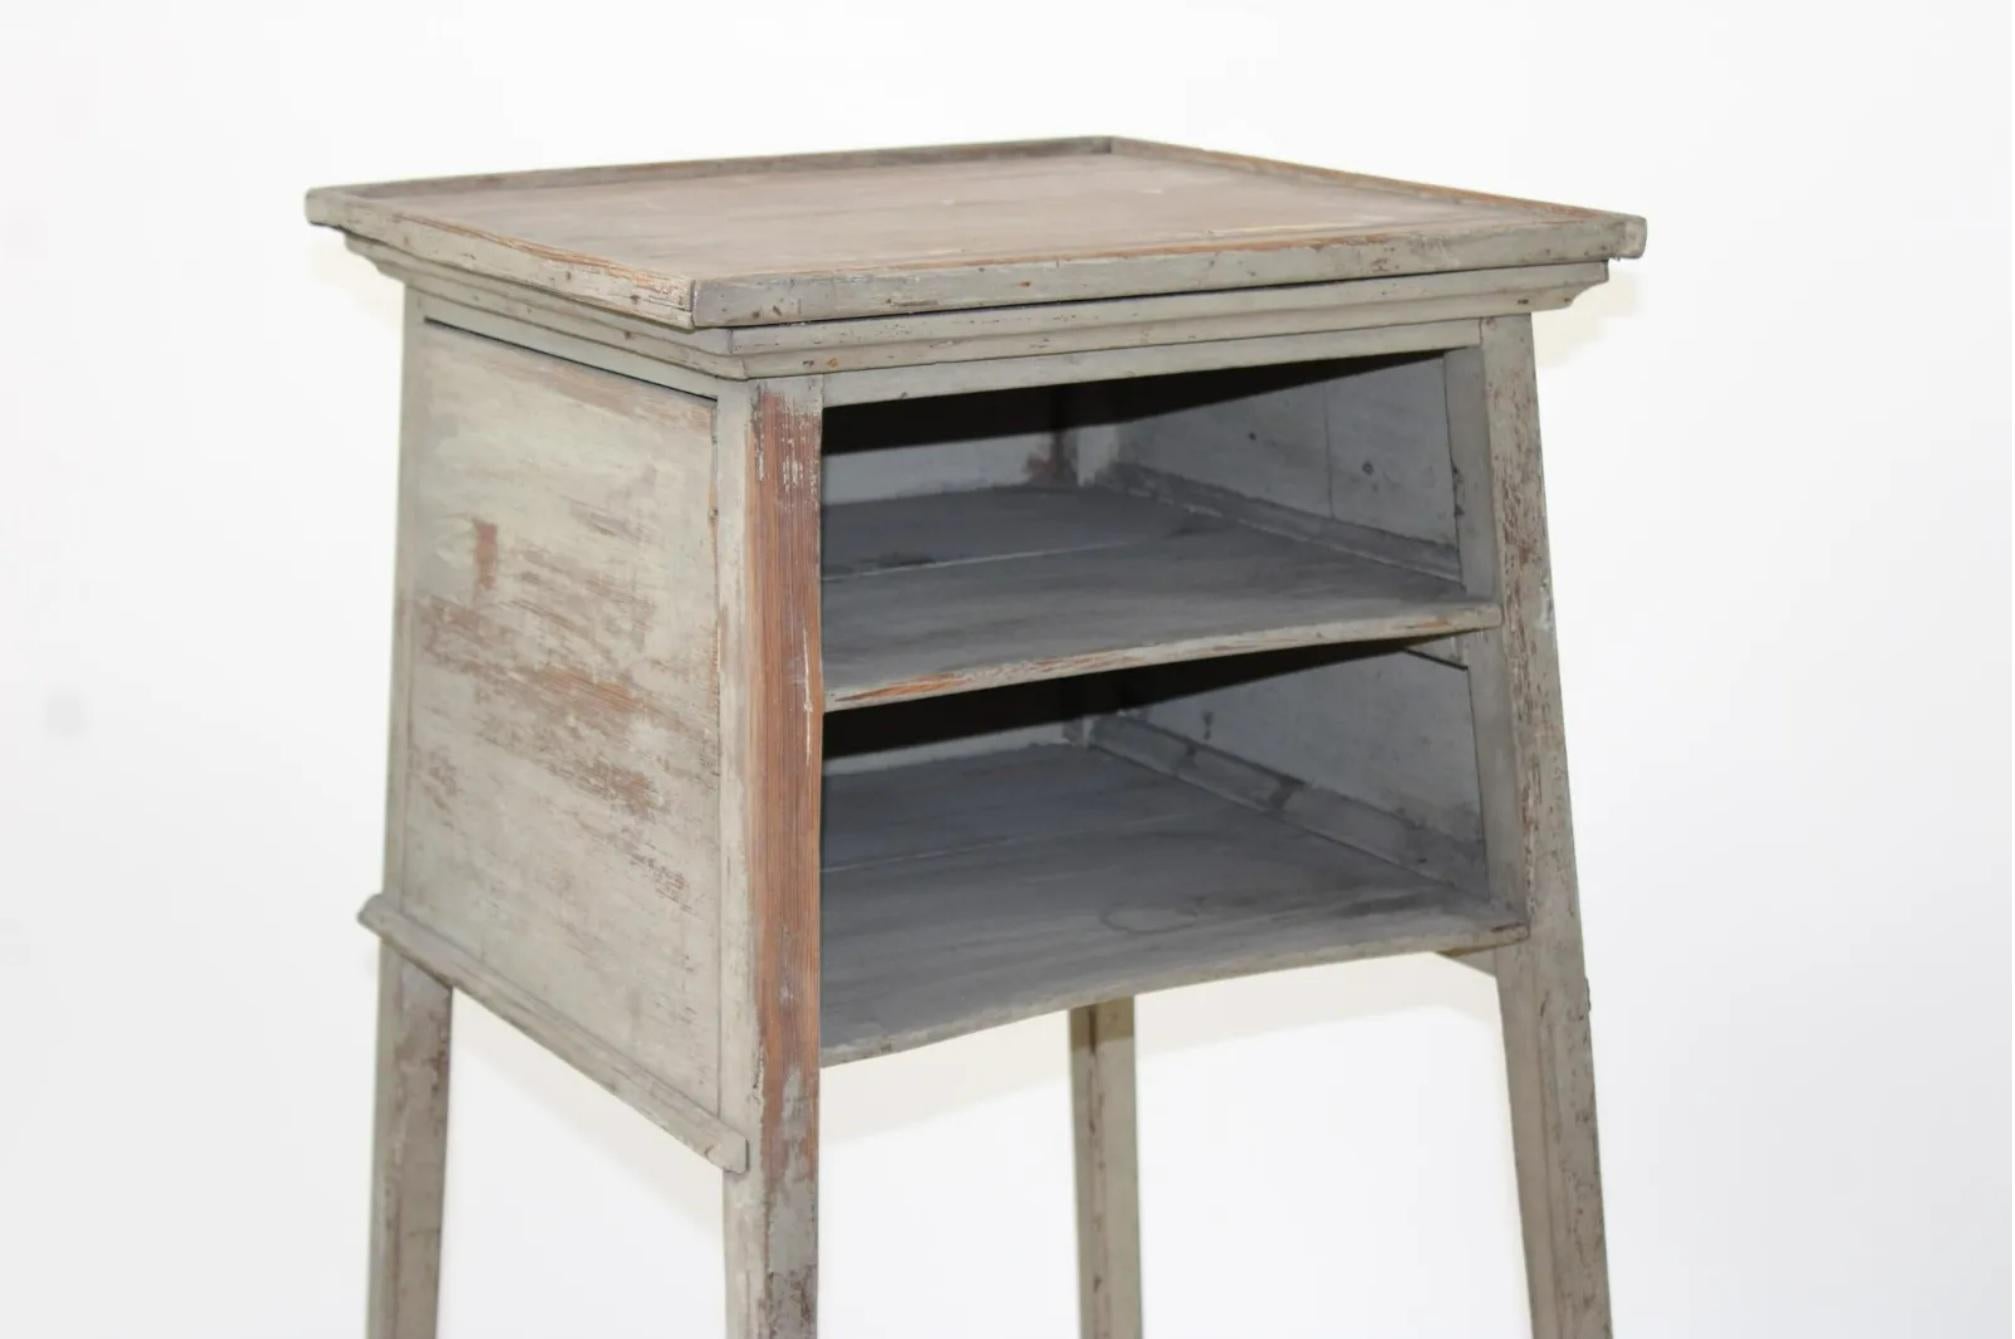 19th c. French grey painted oak rustic stand or pedestal side table with interior shelves and casters.